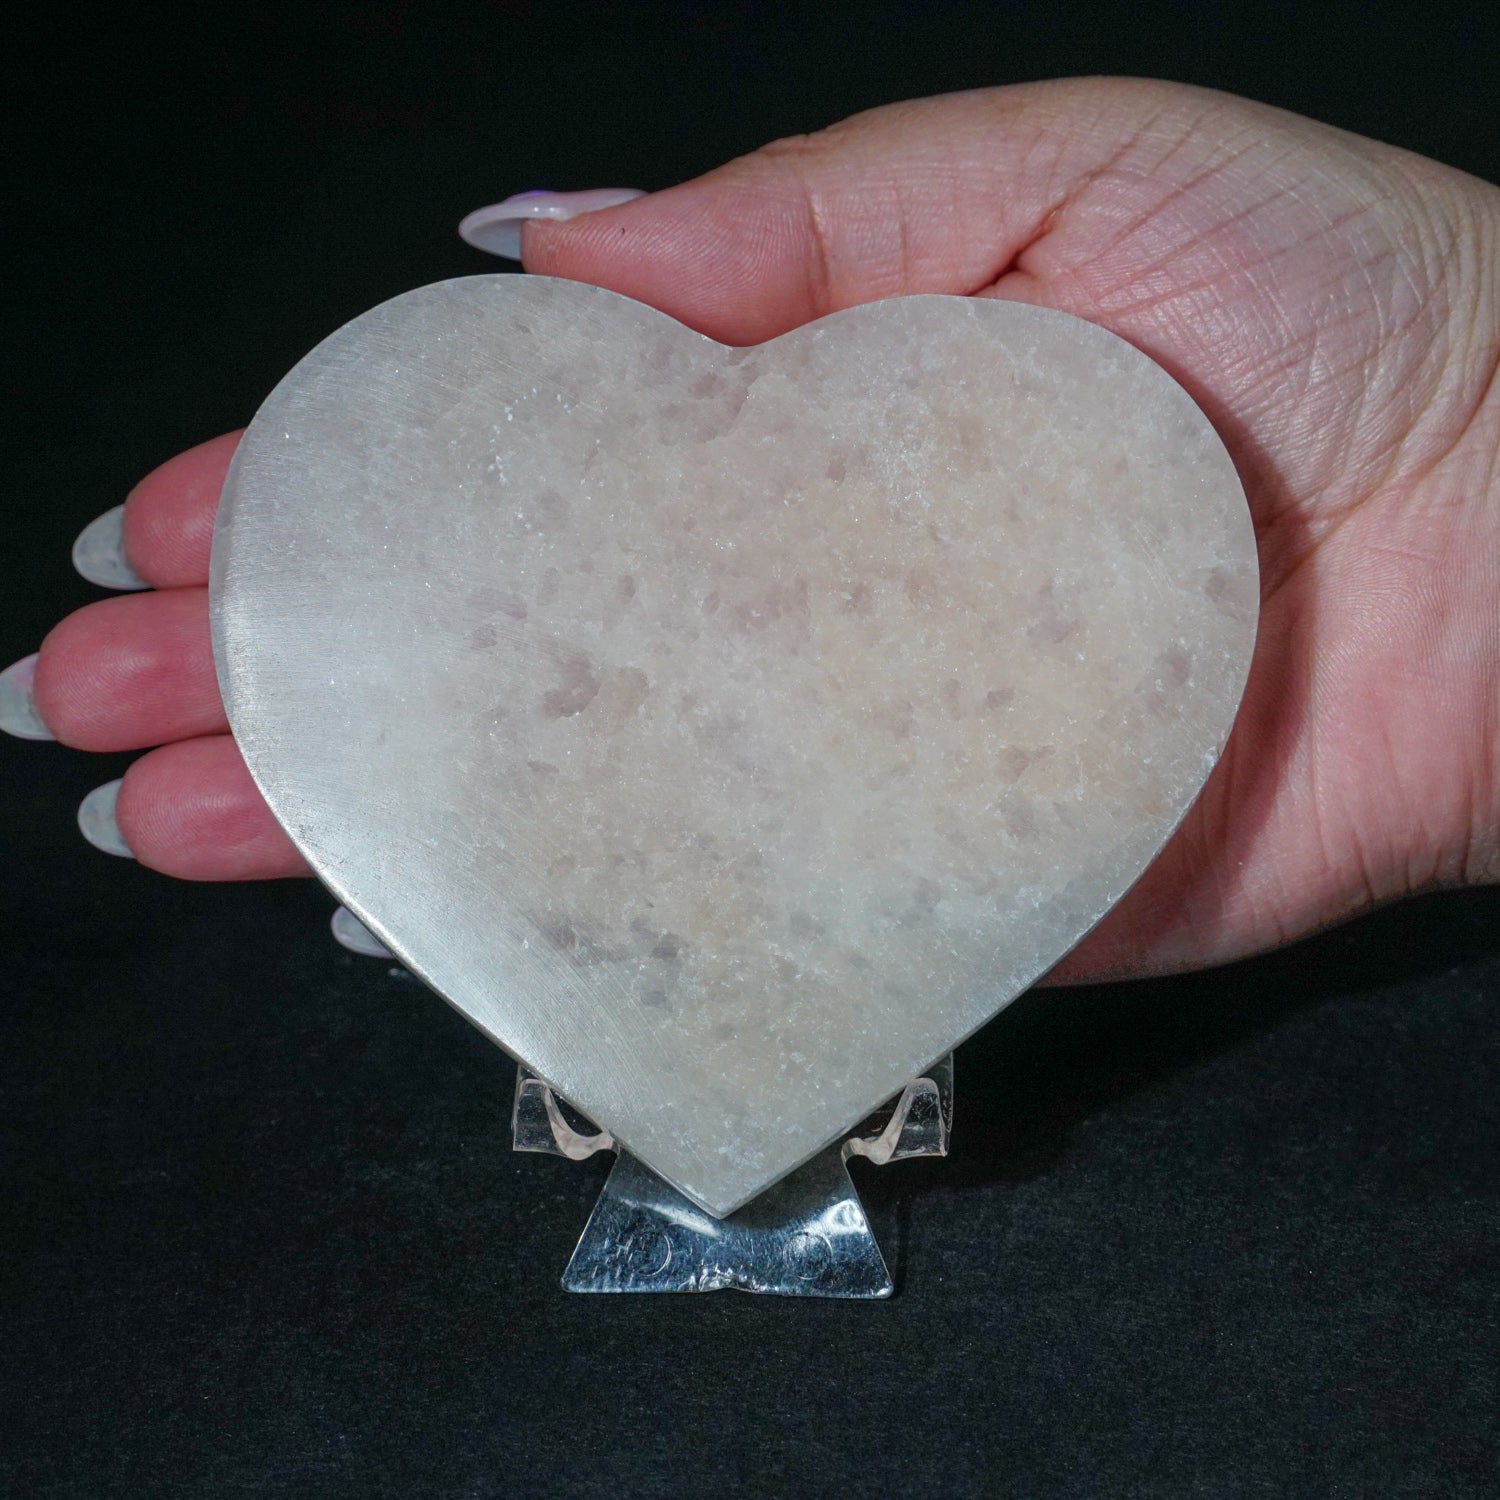 Genuine Polished Selenite Crystal Heart from Morocco (107.9 grams)